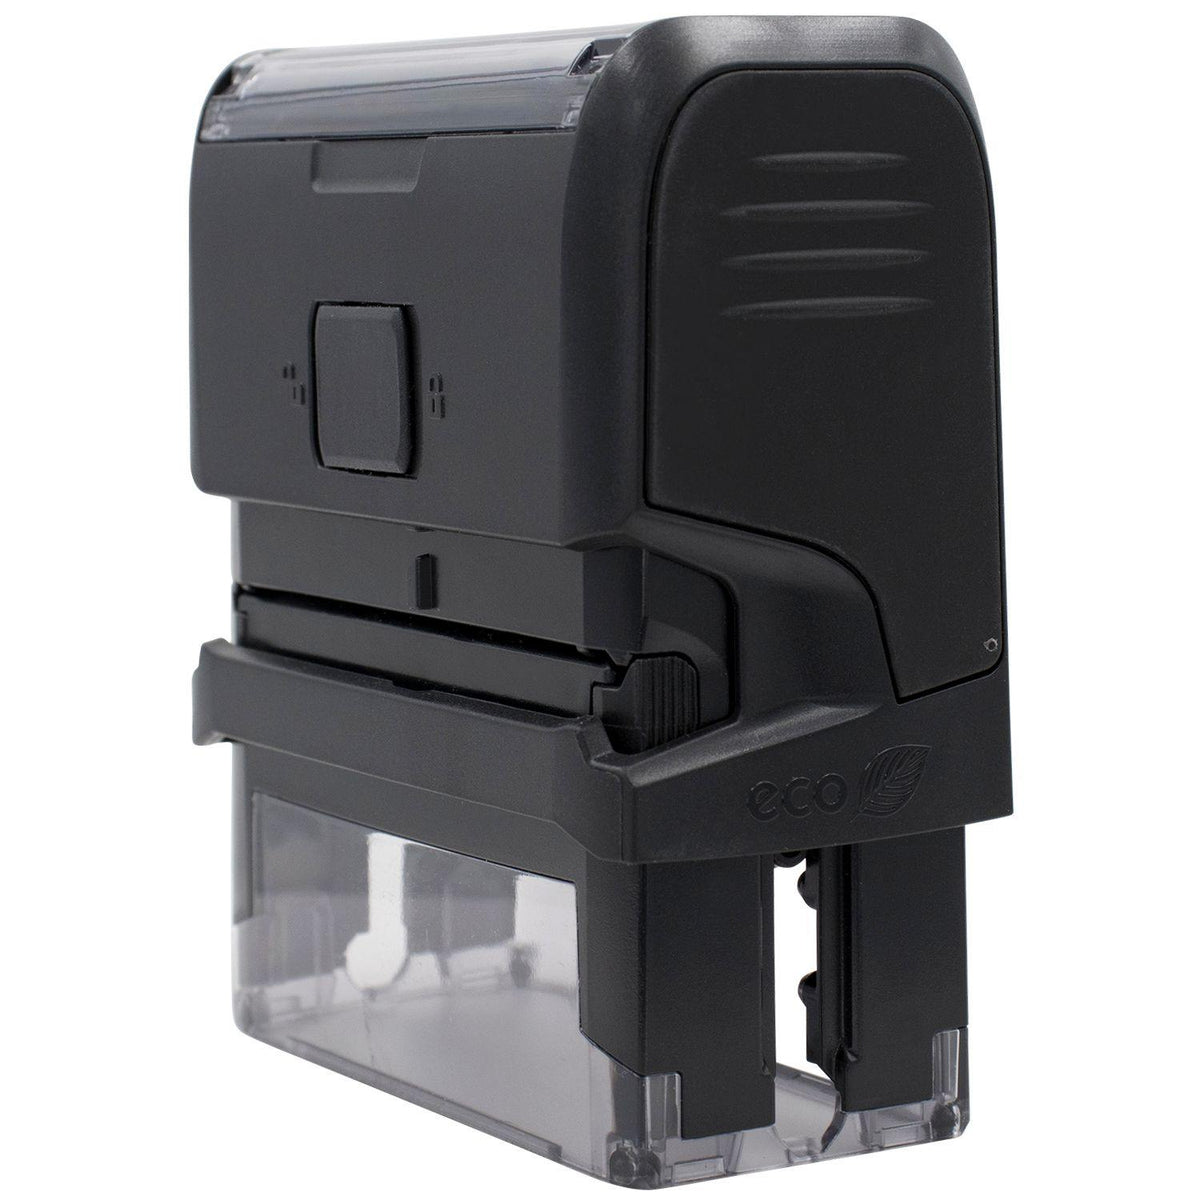 Self-Inking Covid-19 Test Pending Stamp - Engineer Seal Stamps - Brand_Trodat, Impression Size_Small, Stamp Type_Self-Inking Stamp, Type of Use_Medical Office